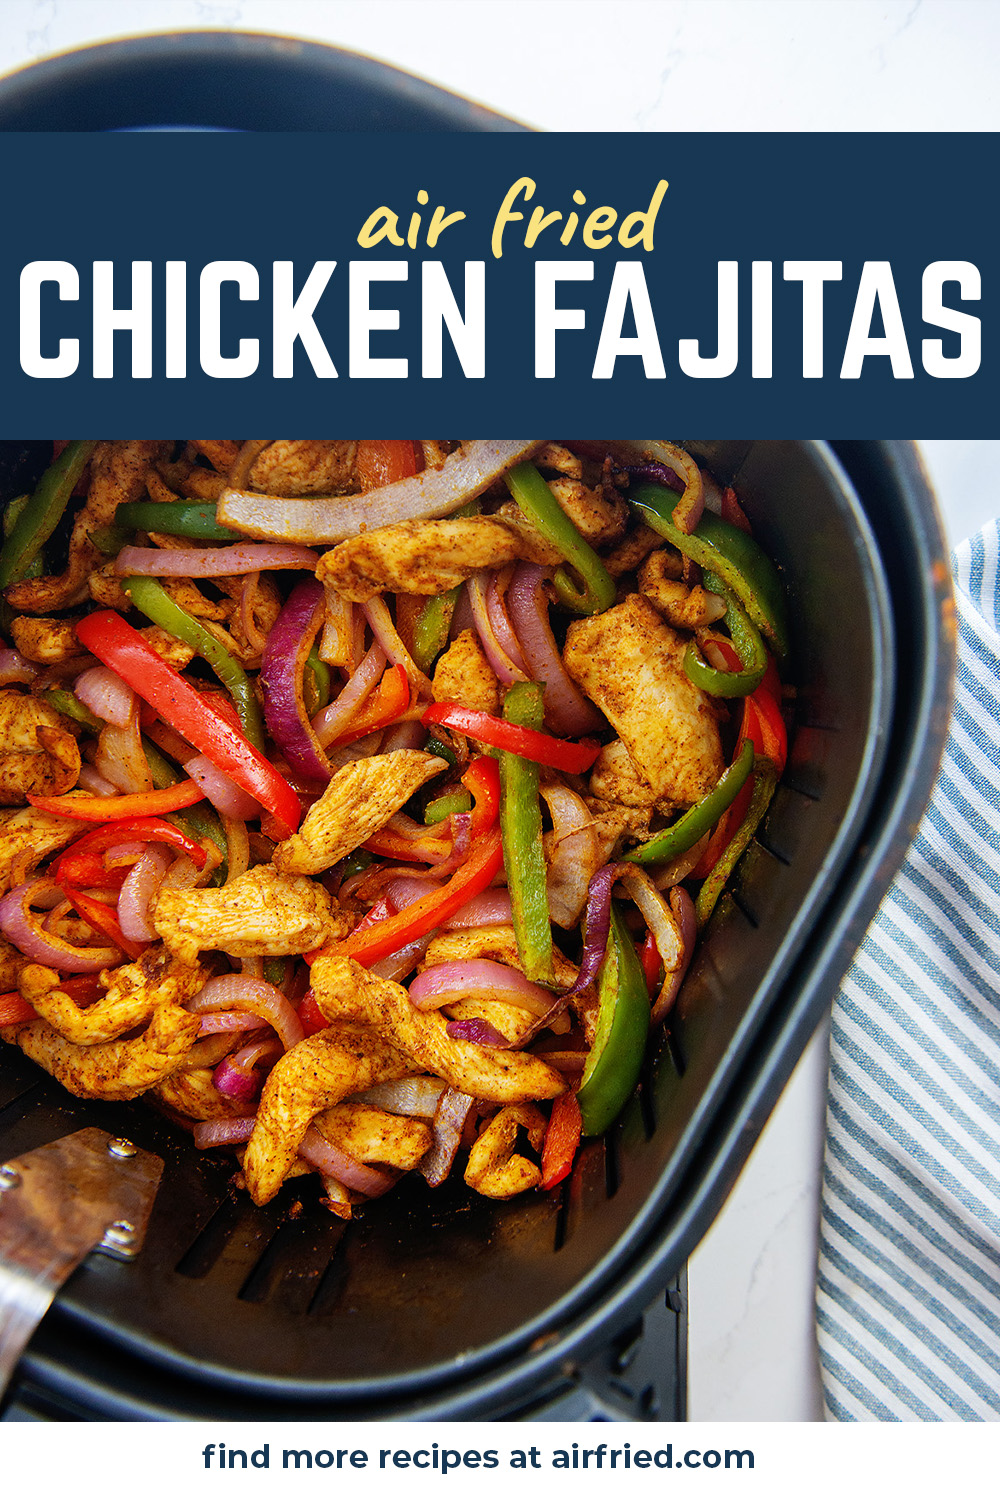 This air fryer chicken fajita recipe is a Mexican inspired dish where everything is cooked together for a great blend of flavors.